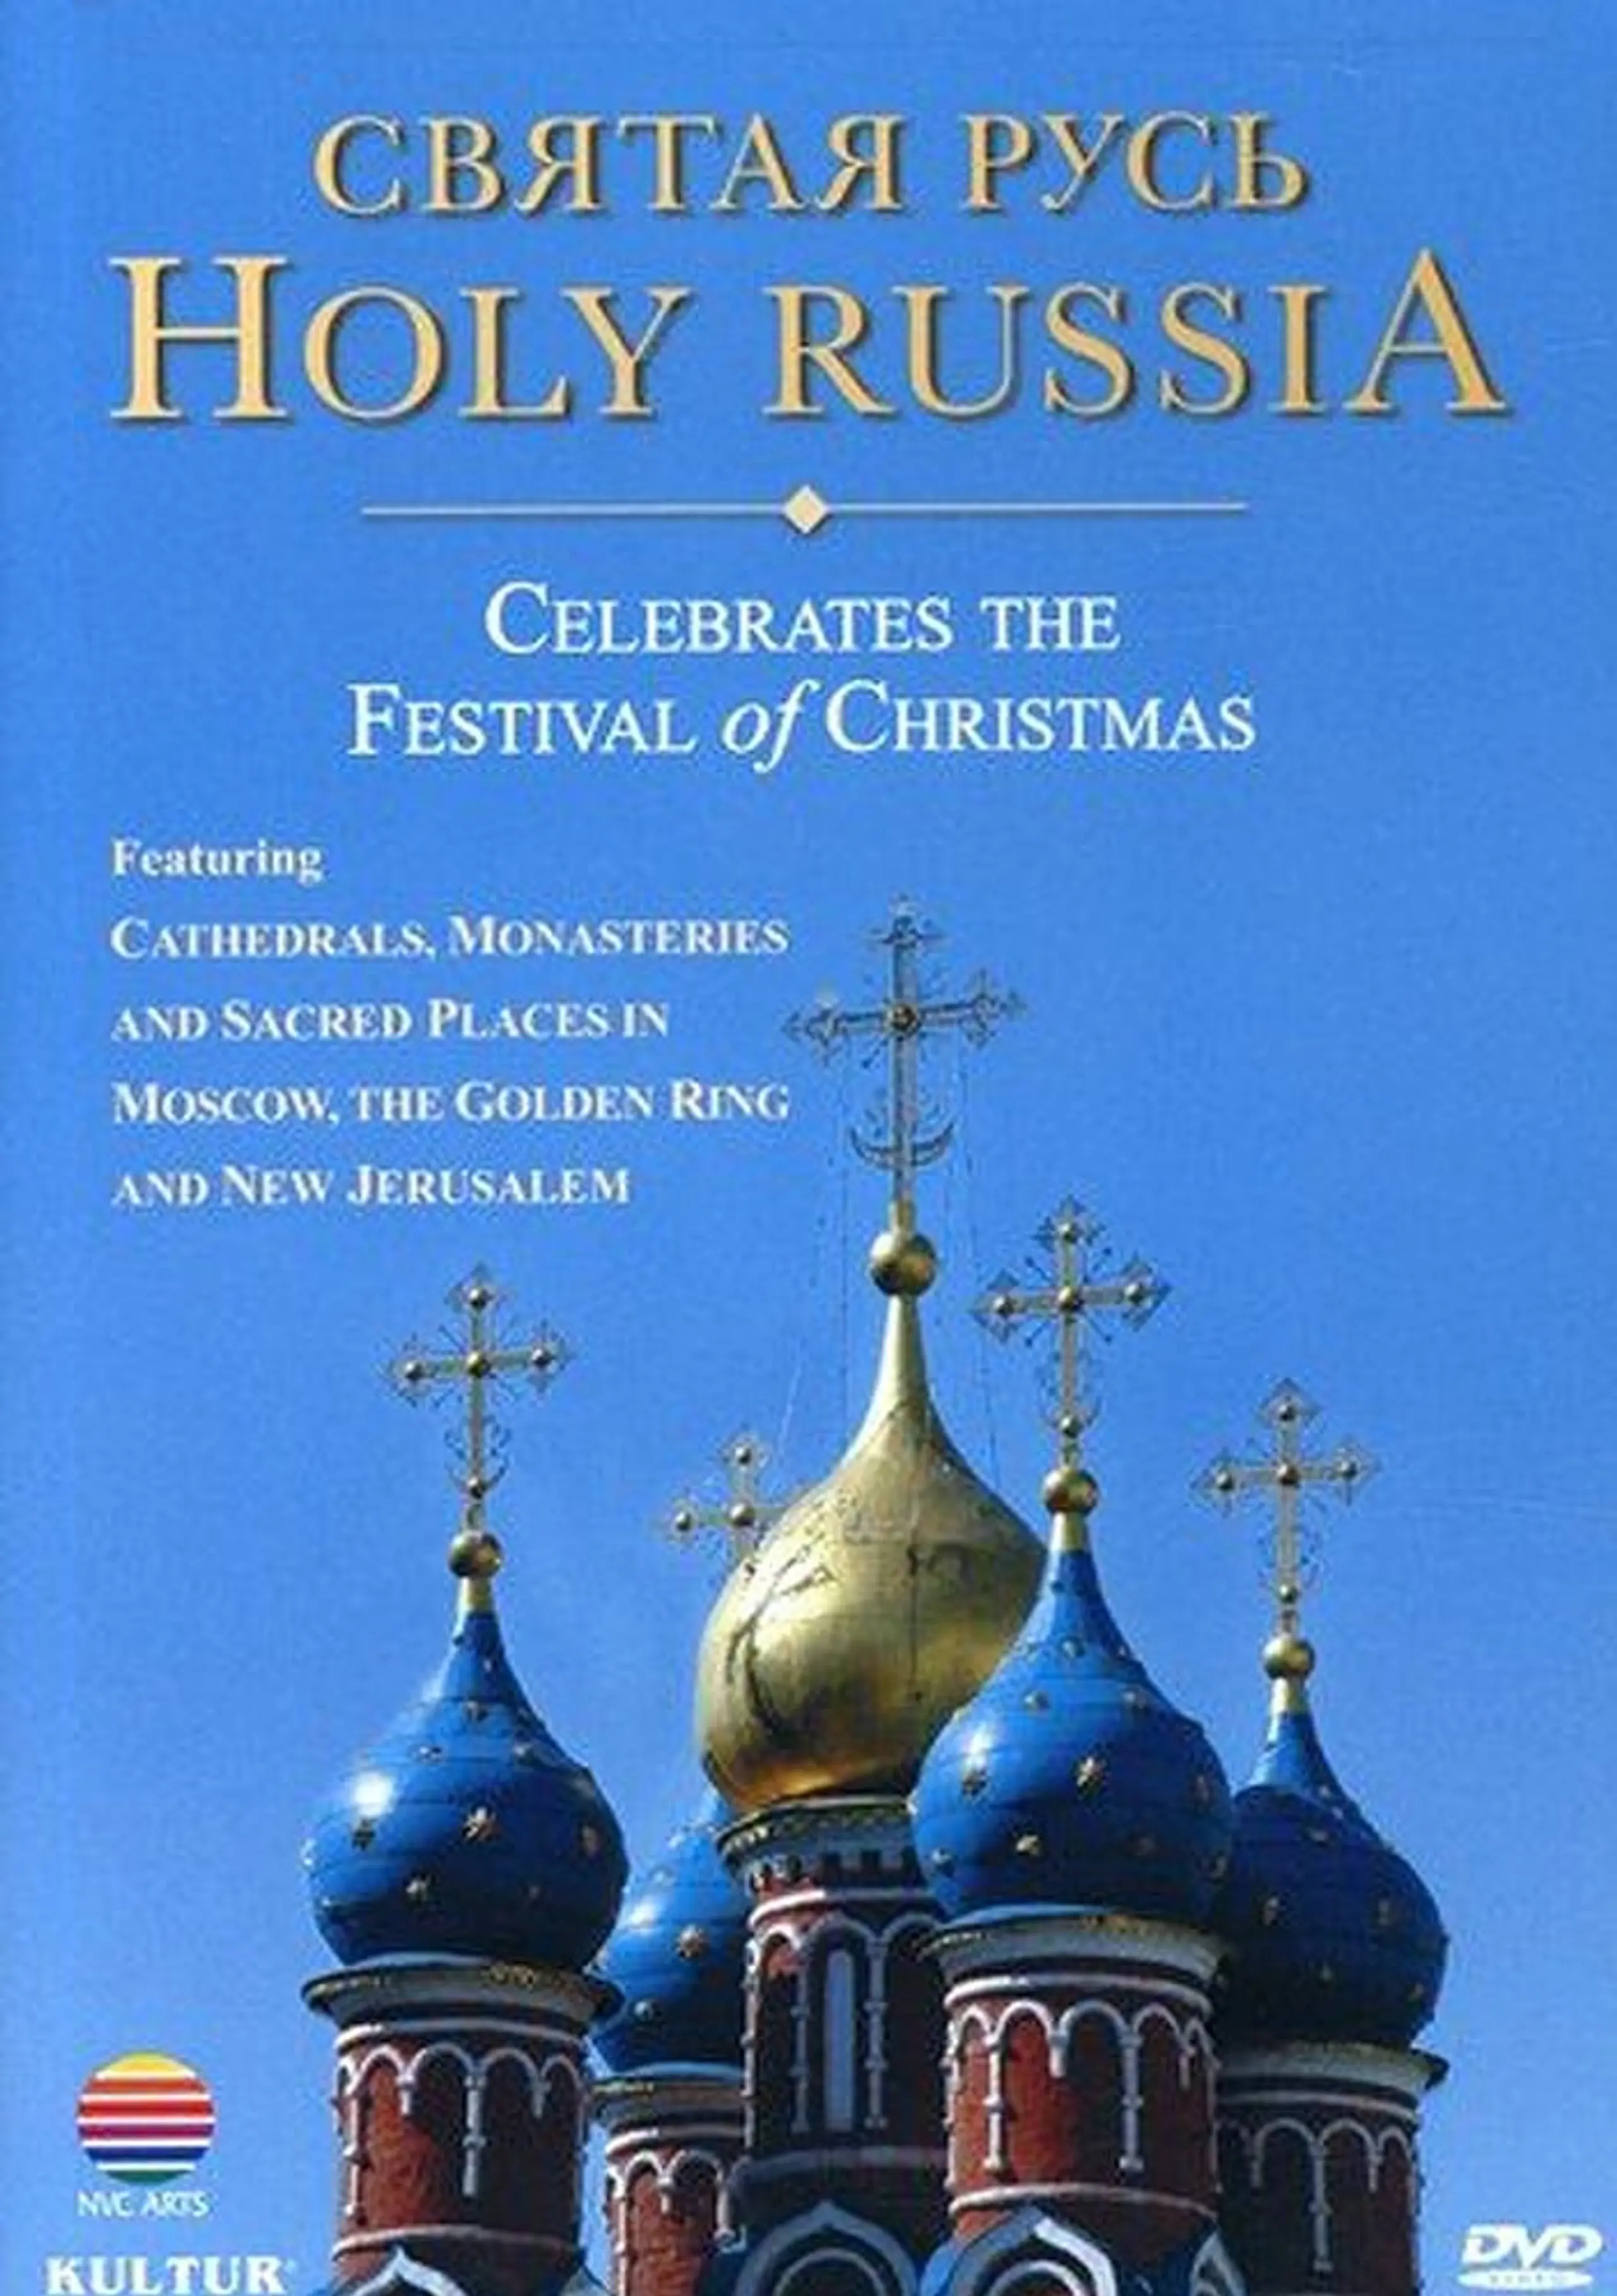 Holy Russia